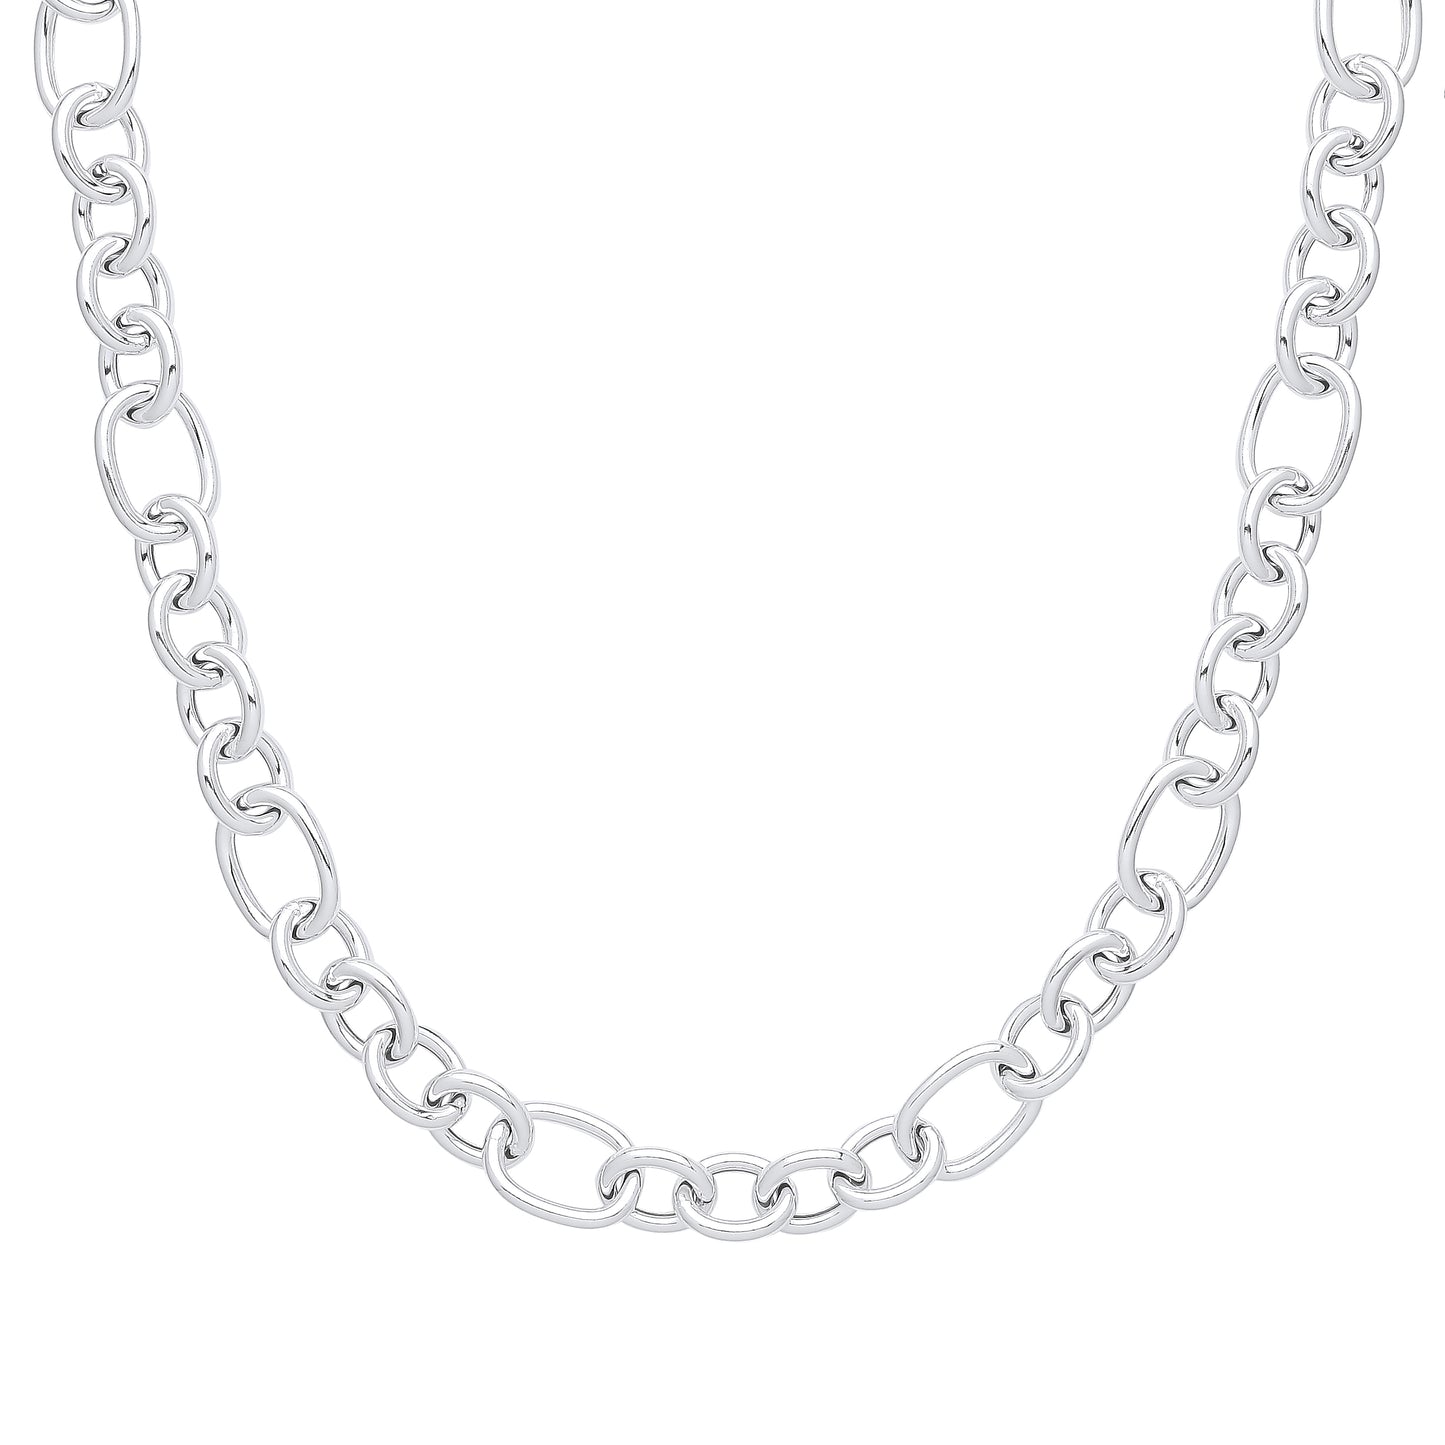 Silver  Hollow Mixed Round Oval Belcher Chain Necklace - GVK356